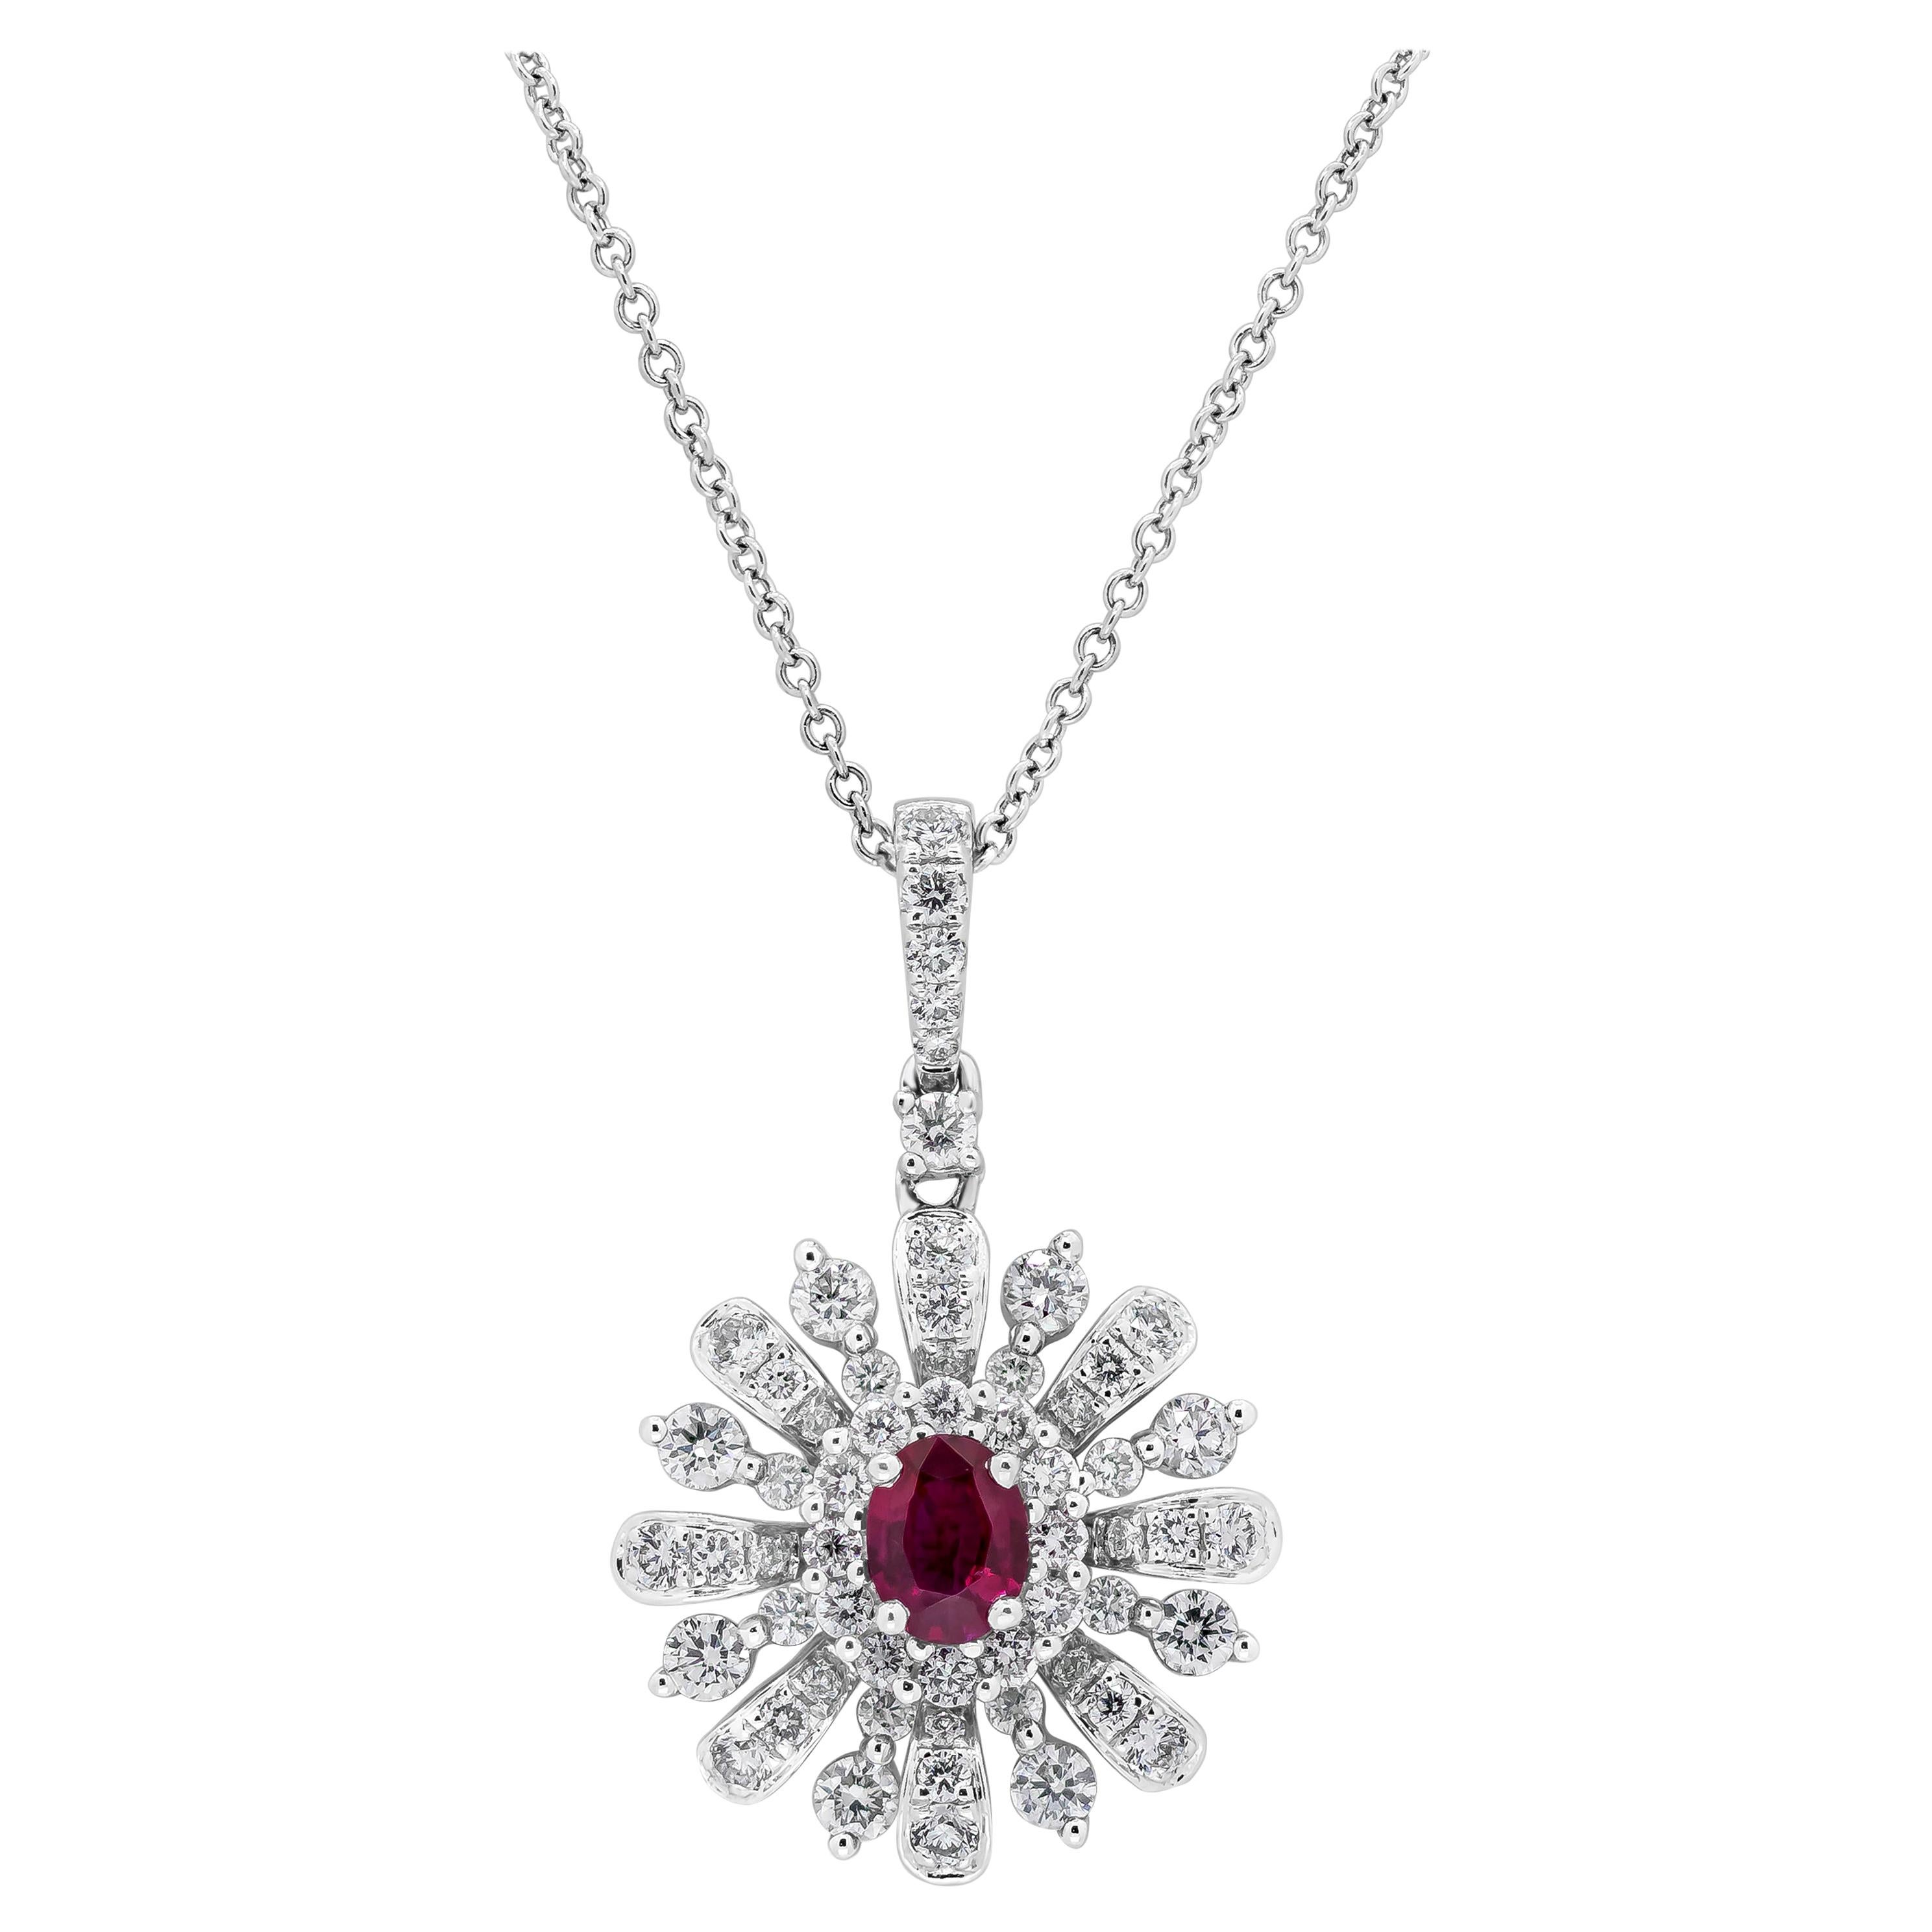 Roman Malakov 0.32 Carats Oval Cut Ruby with Round Diamonds Pendant Necklace For Sale